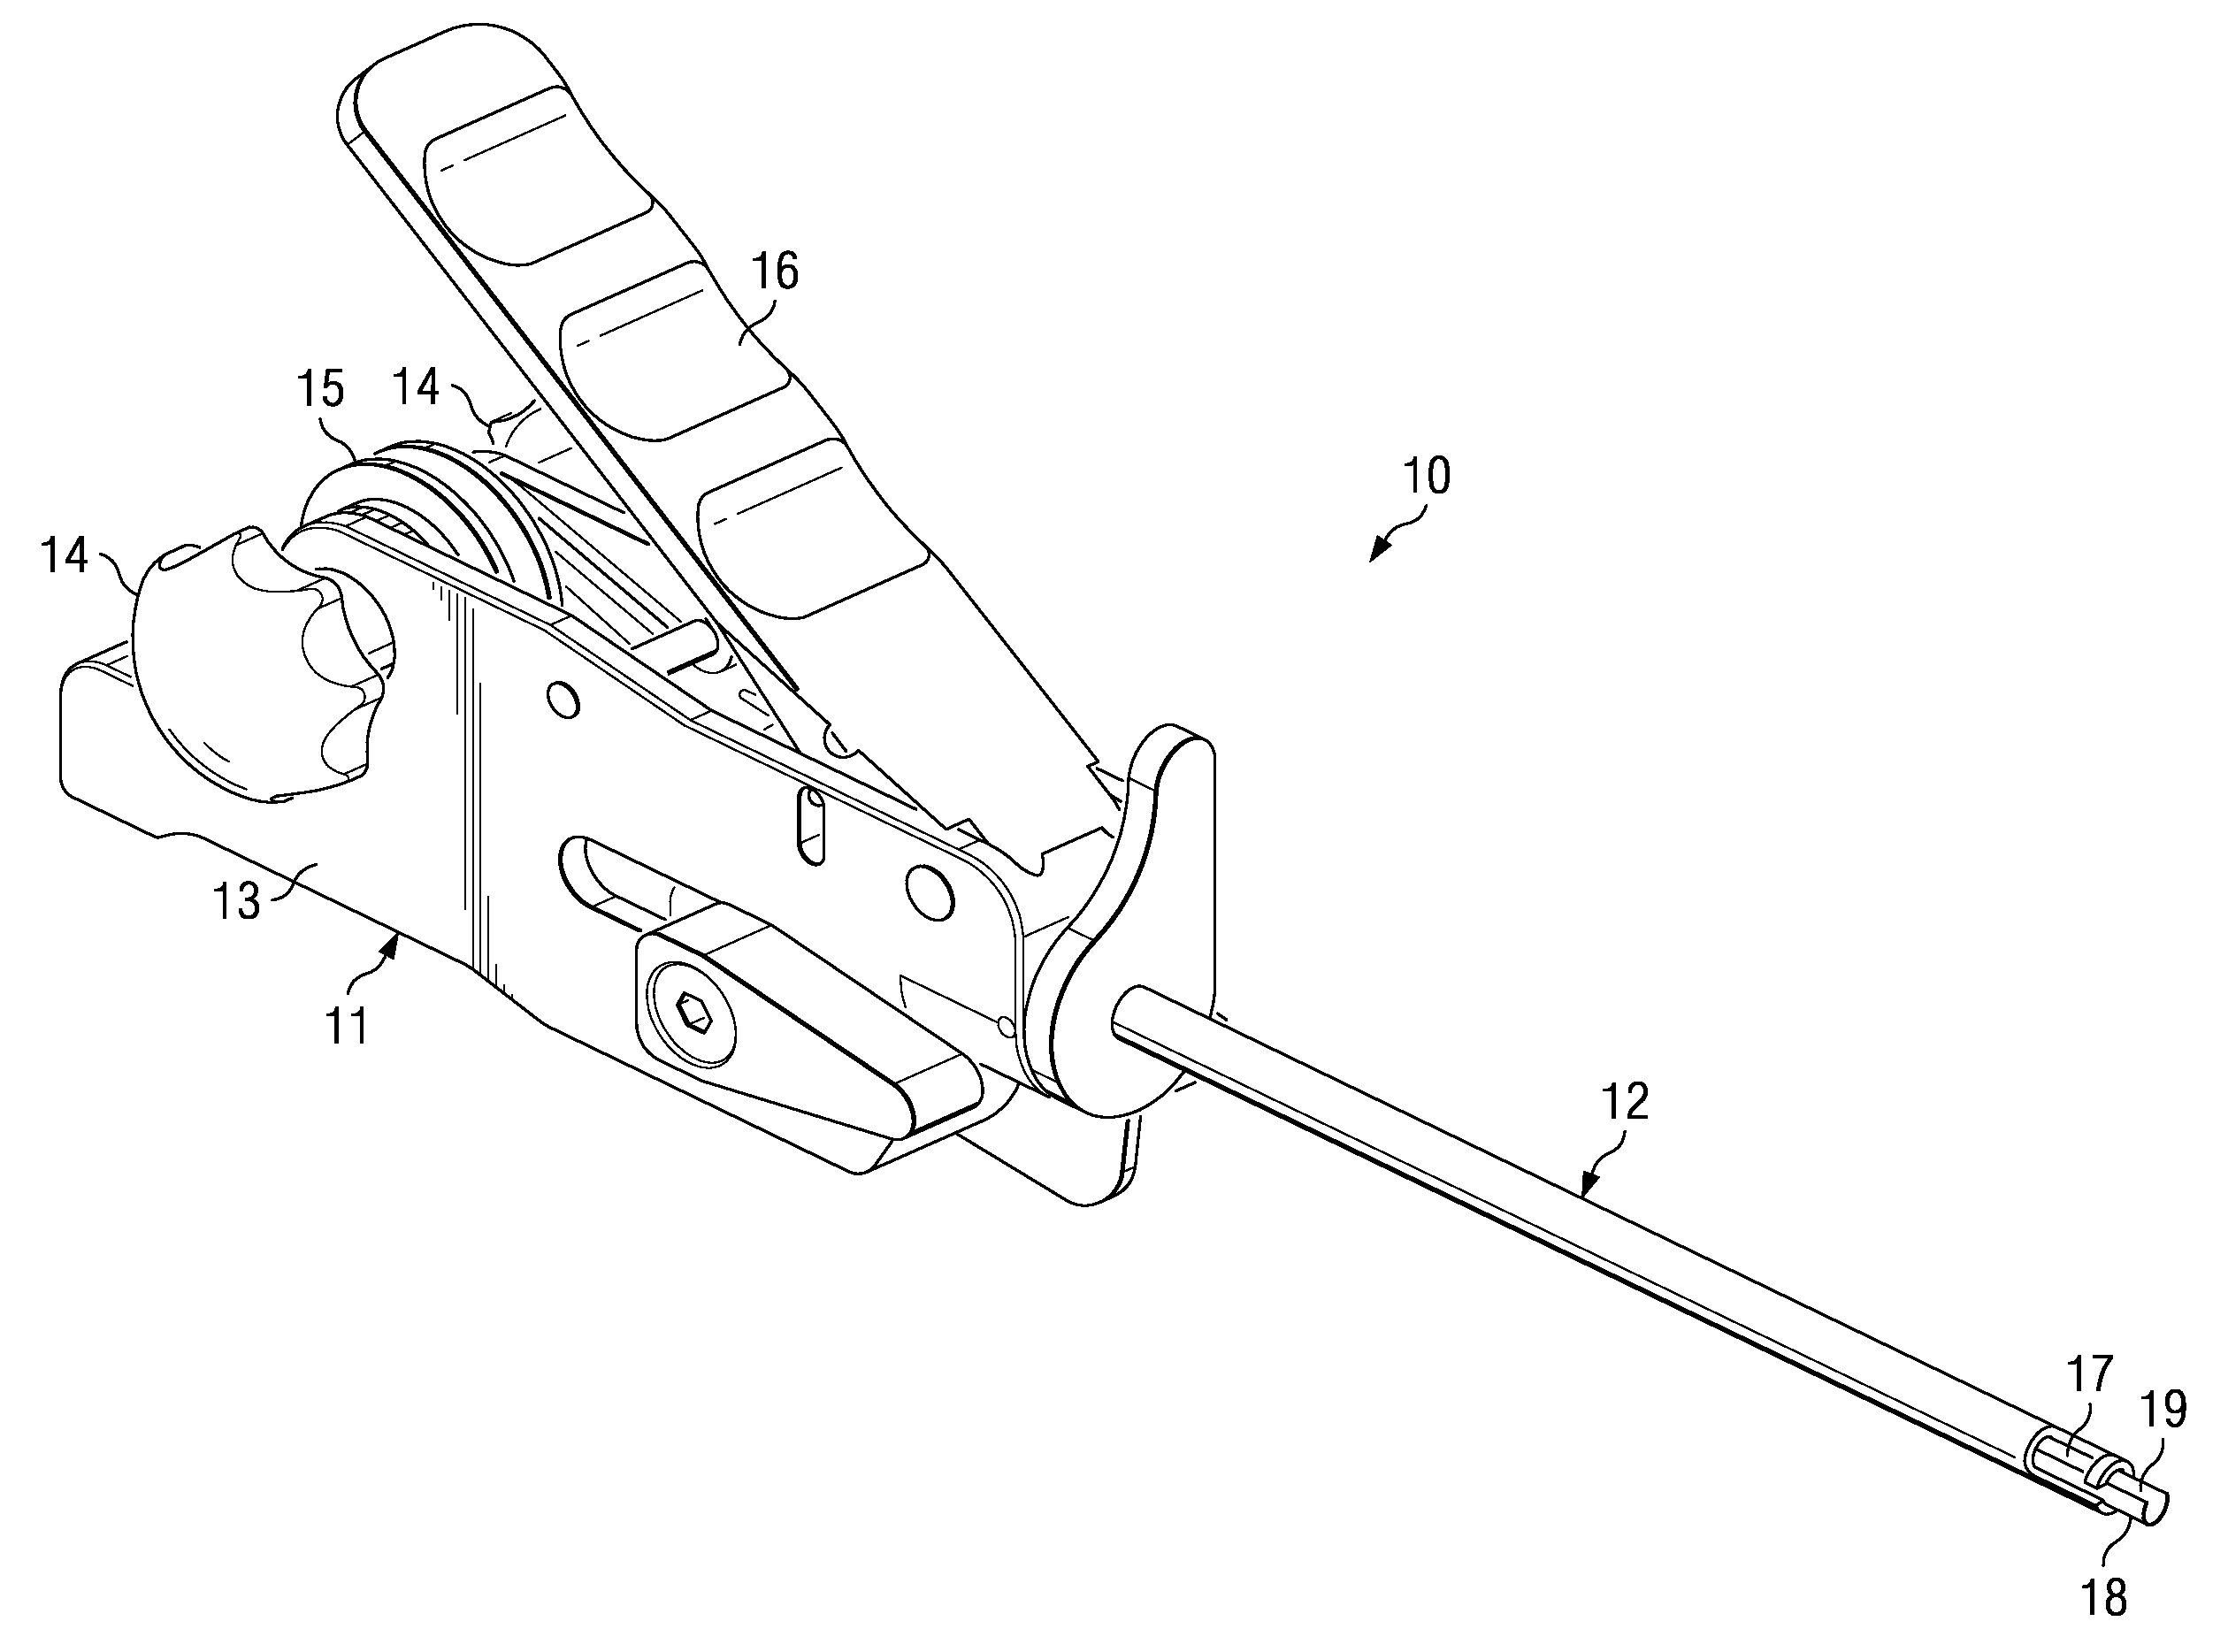 Independent suture tensioning and snaring apparatus